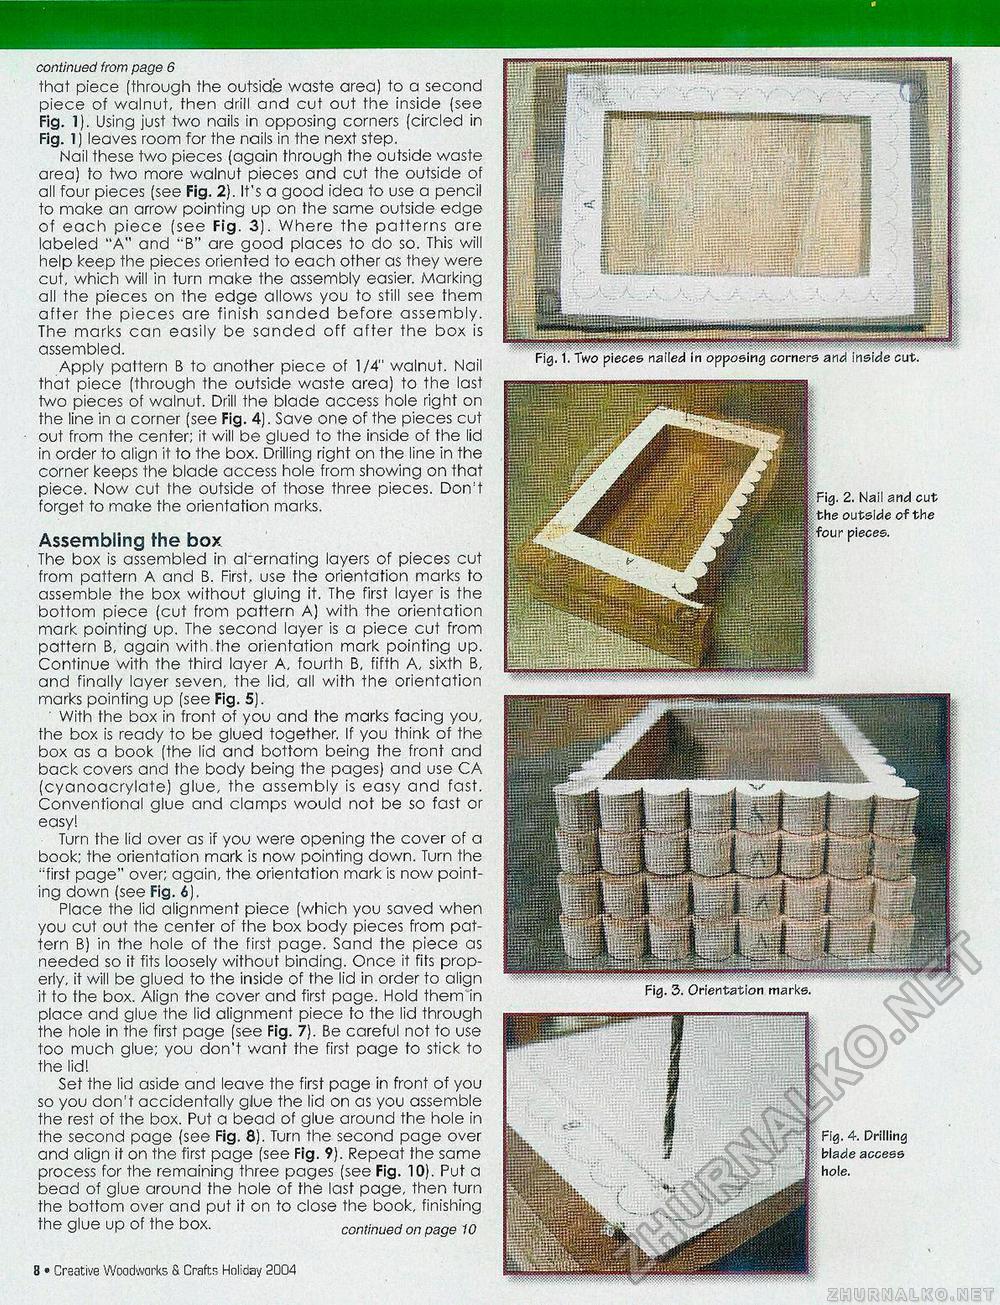 Creative Woodworks  & crafts-103-2004-Holiday,  8